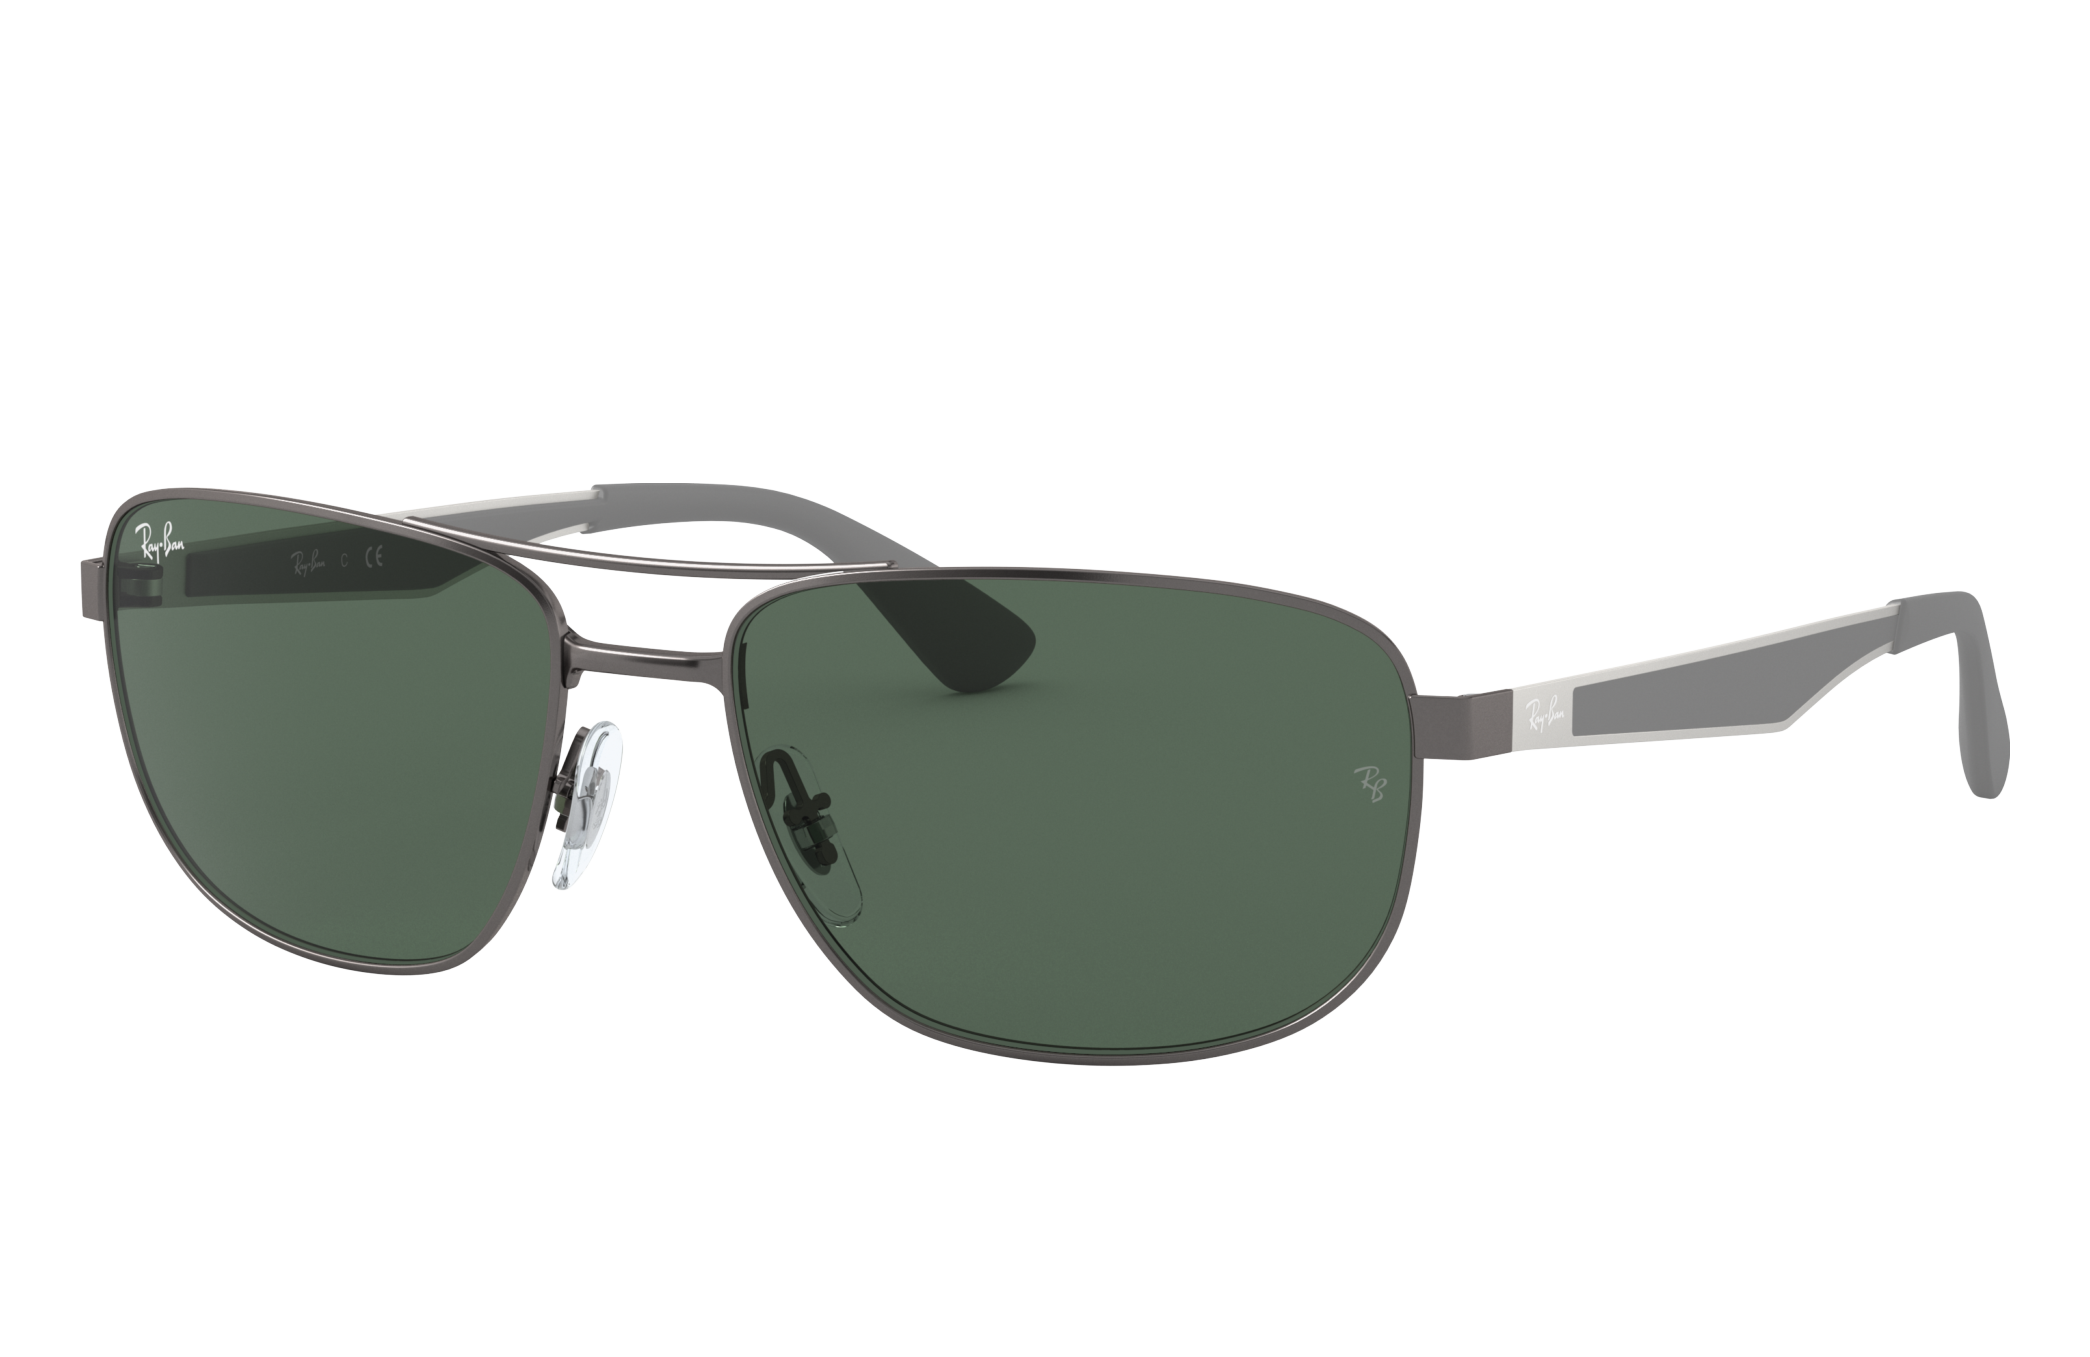 Rb3528 Sunglasses in Gunmetal and Green - RB3528 | Ray-Ban®